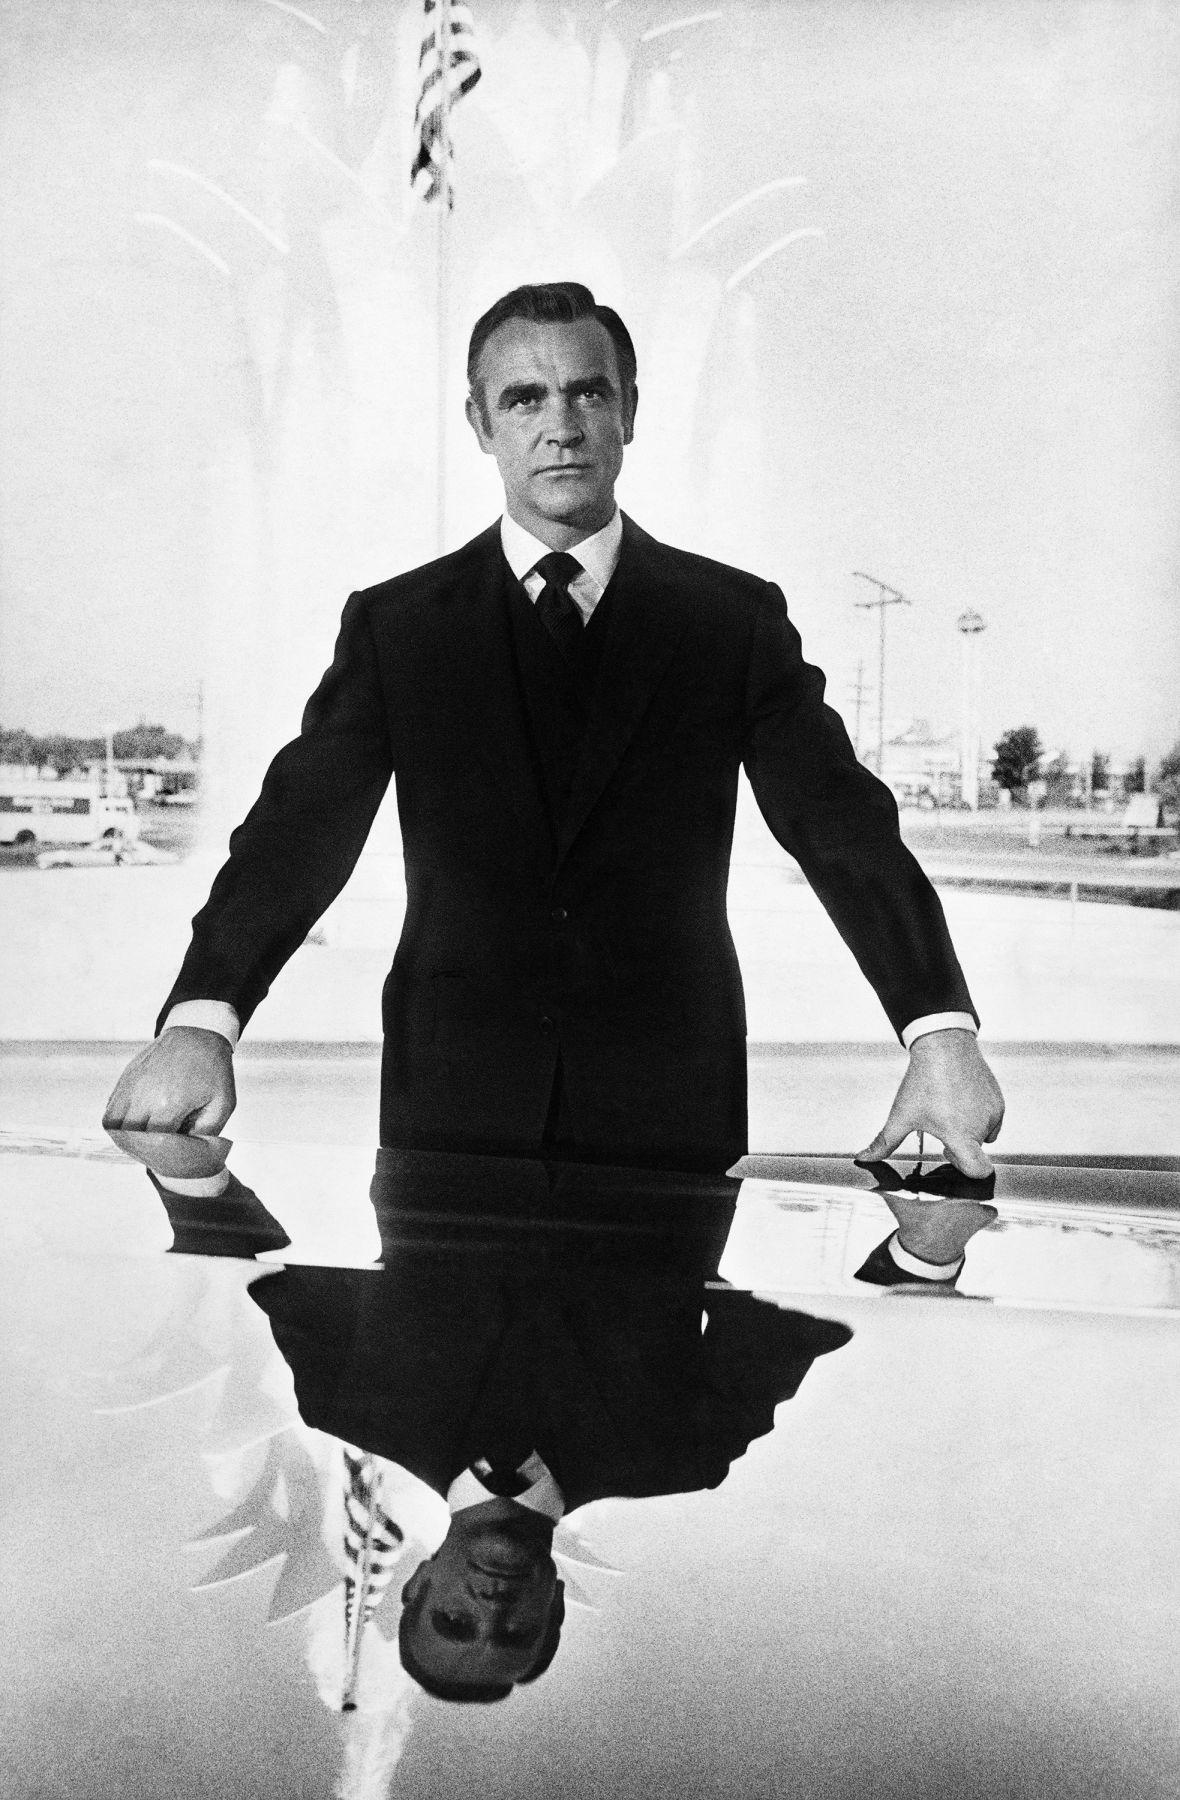 Terry O'Neill Portrait Photograph - Sean Connery on the set of "Diamonds are Forever" (Signed)